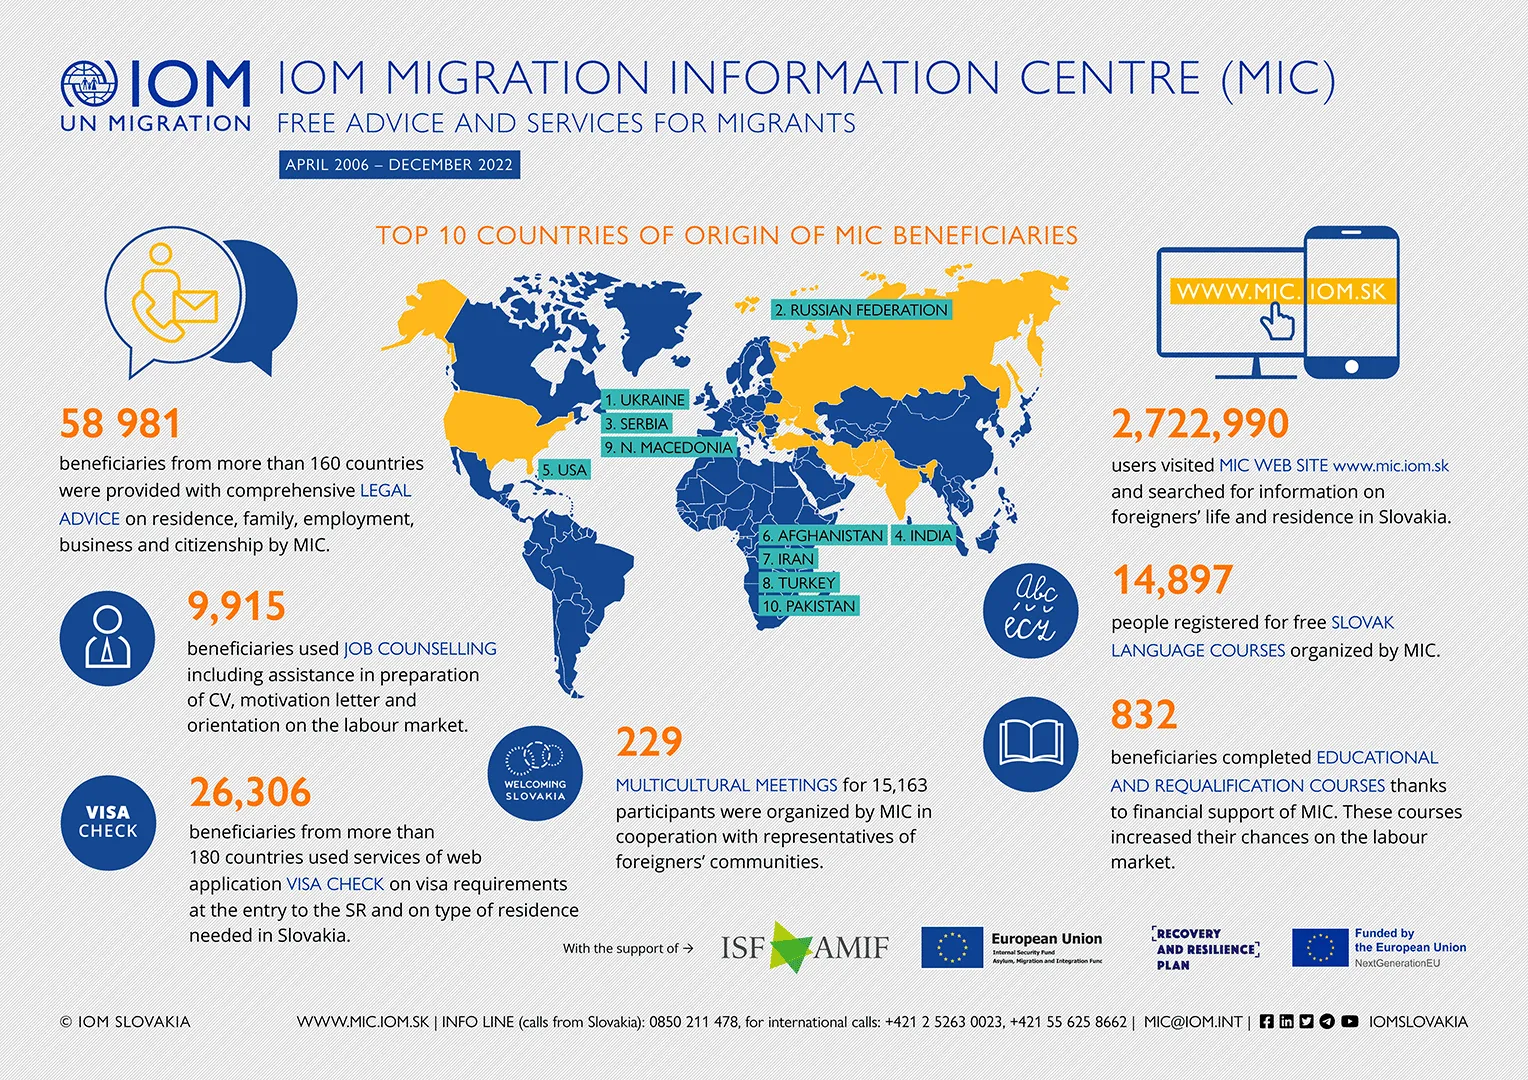 IOM - Infographics - Activities of the IOM Migration Information Centre in integration of foreigners, 2006 - December 2022